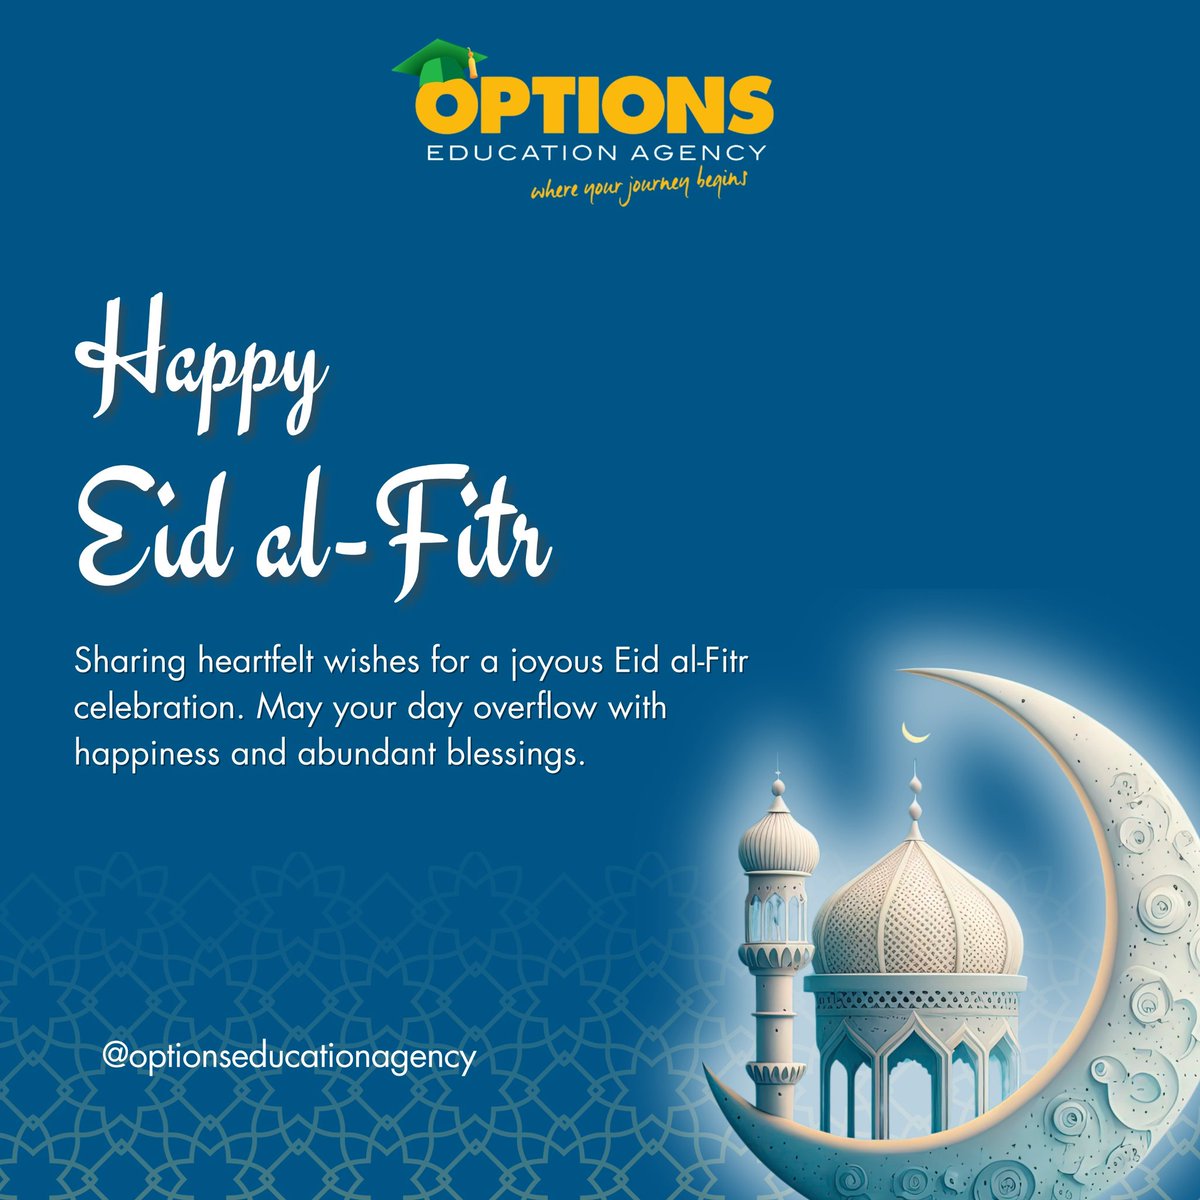 Warmest Eid wishes to our Muslim brothers and sisters! May this Eid be a source of immense happiness and fulfillment for you. #Eidmubarak2024